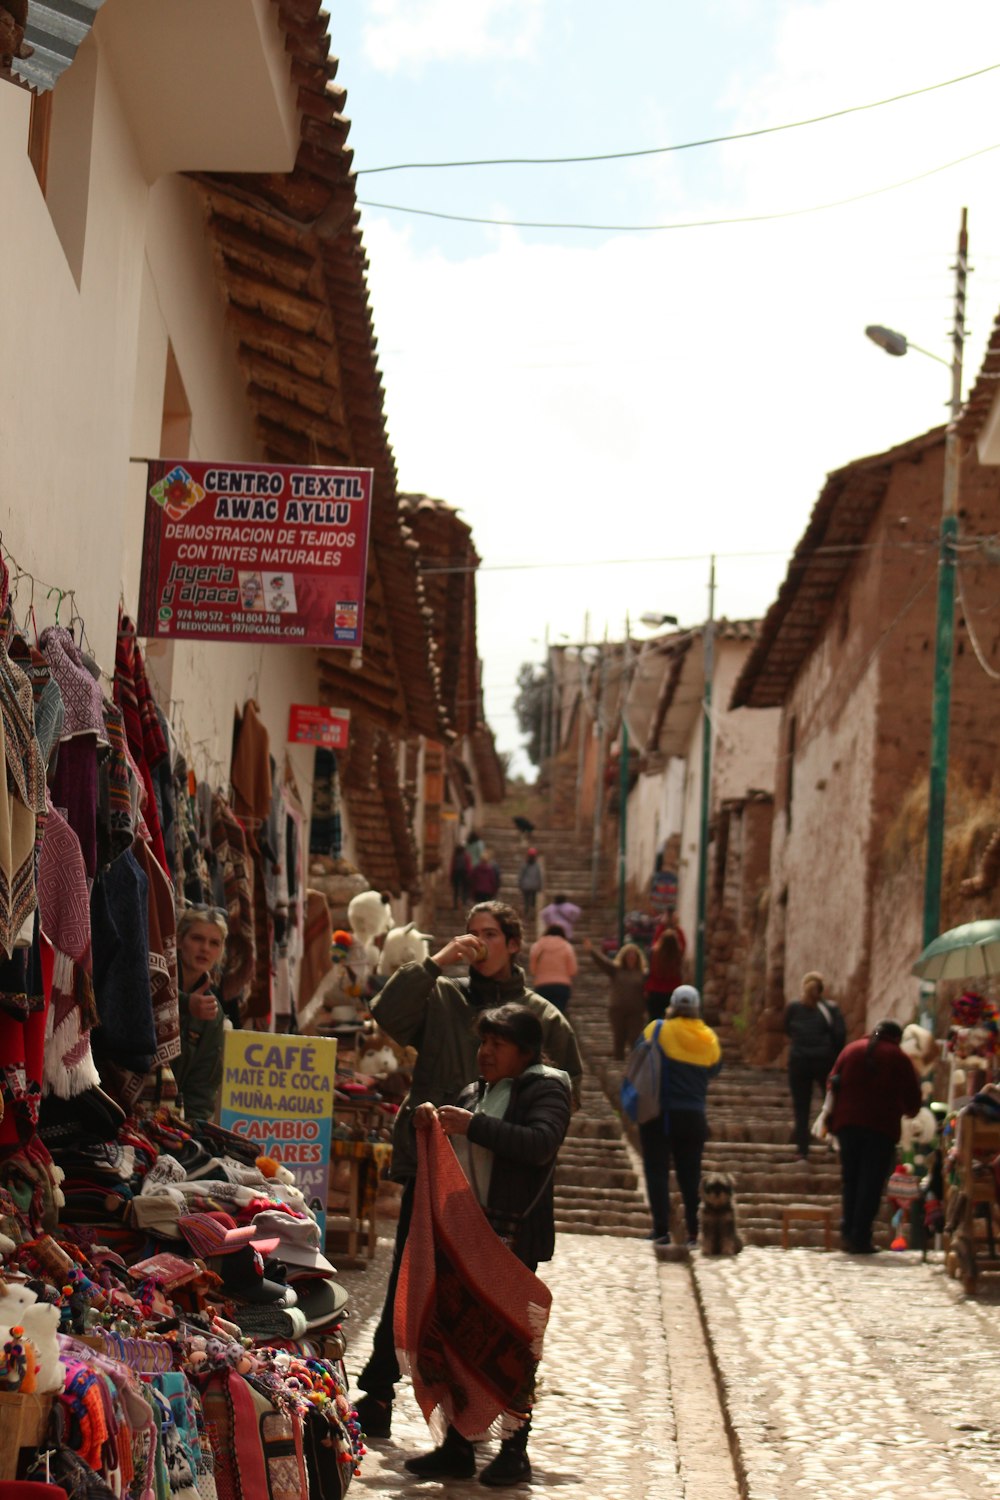 a narrow street lined with shops and people